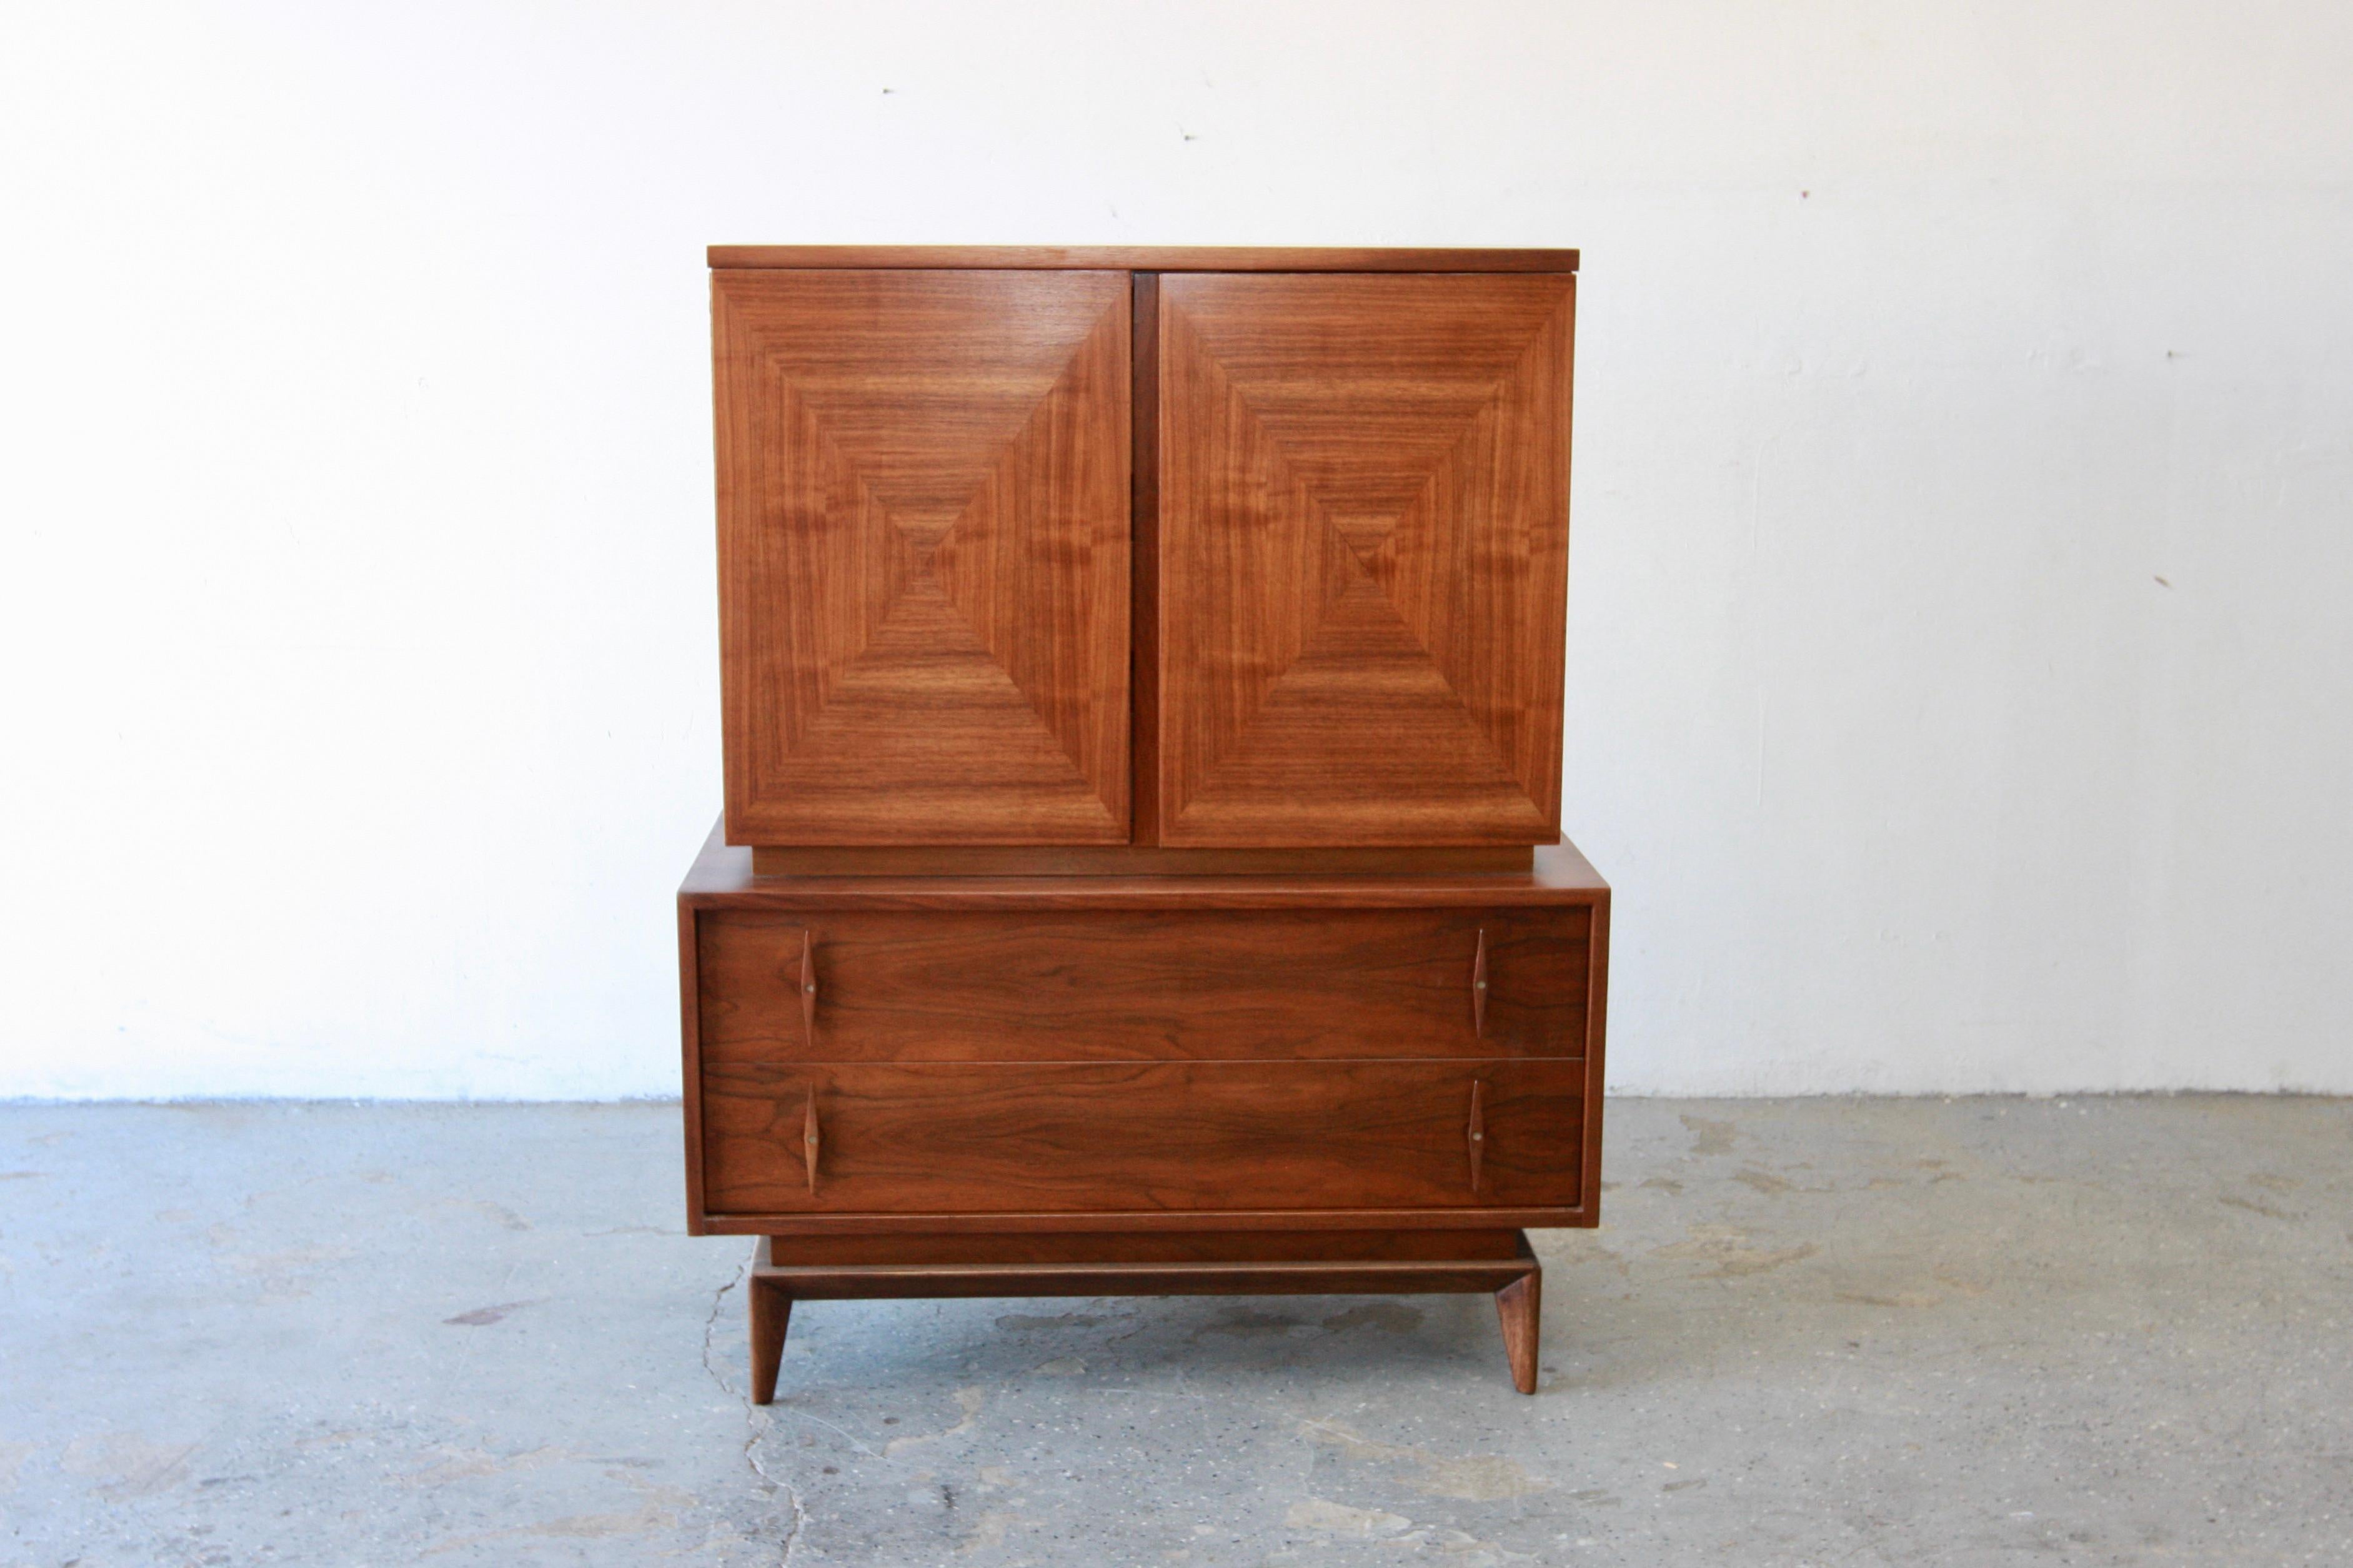 Mid century modern highboy/gentlemen’s chest by American of Martinsville. Here is a beautiful mid-century highboy dresser which has loads of storage for all your goodies! The top portion has two open doors, which house 3 wood drawers. As you can